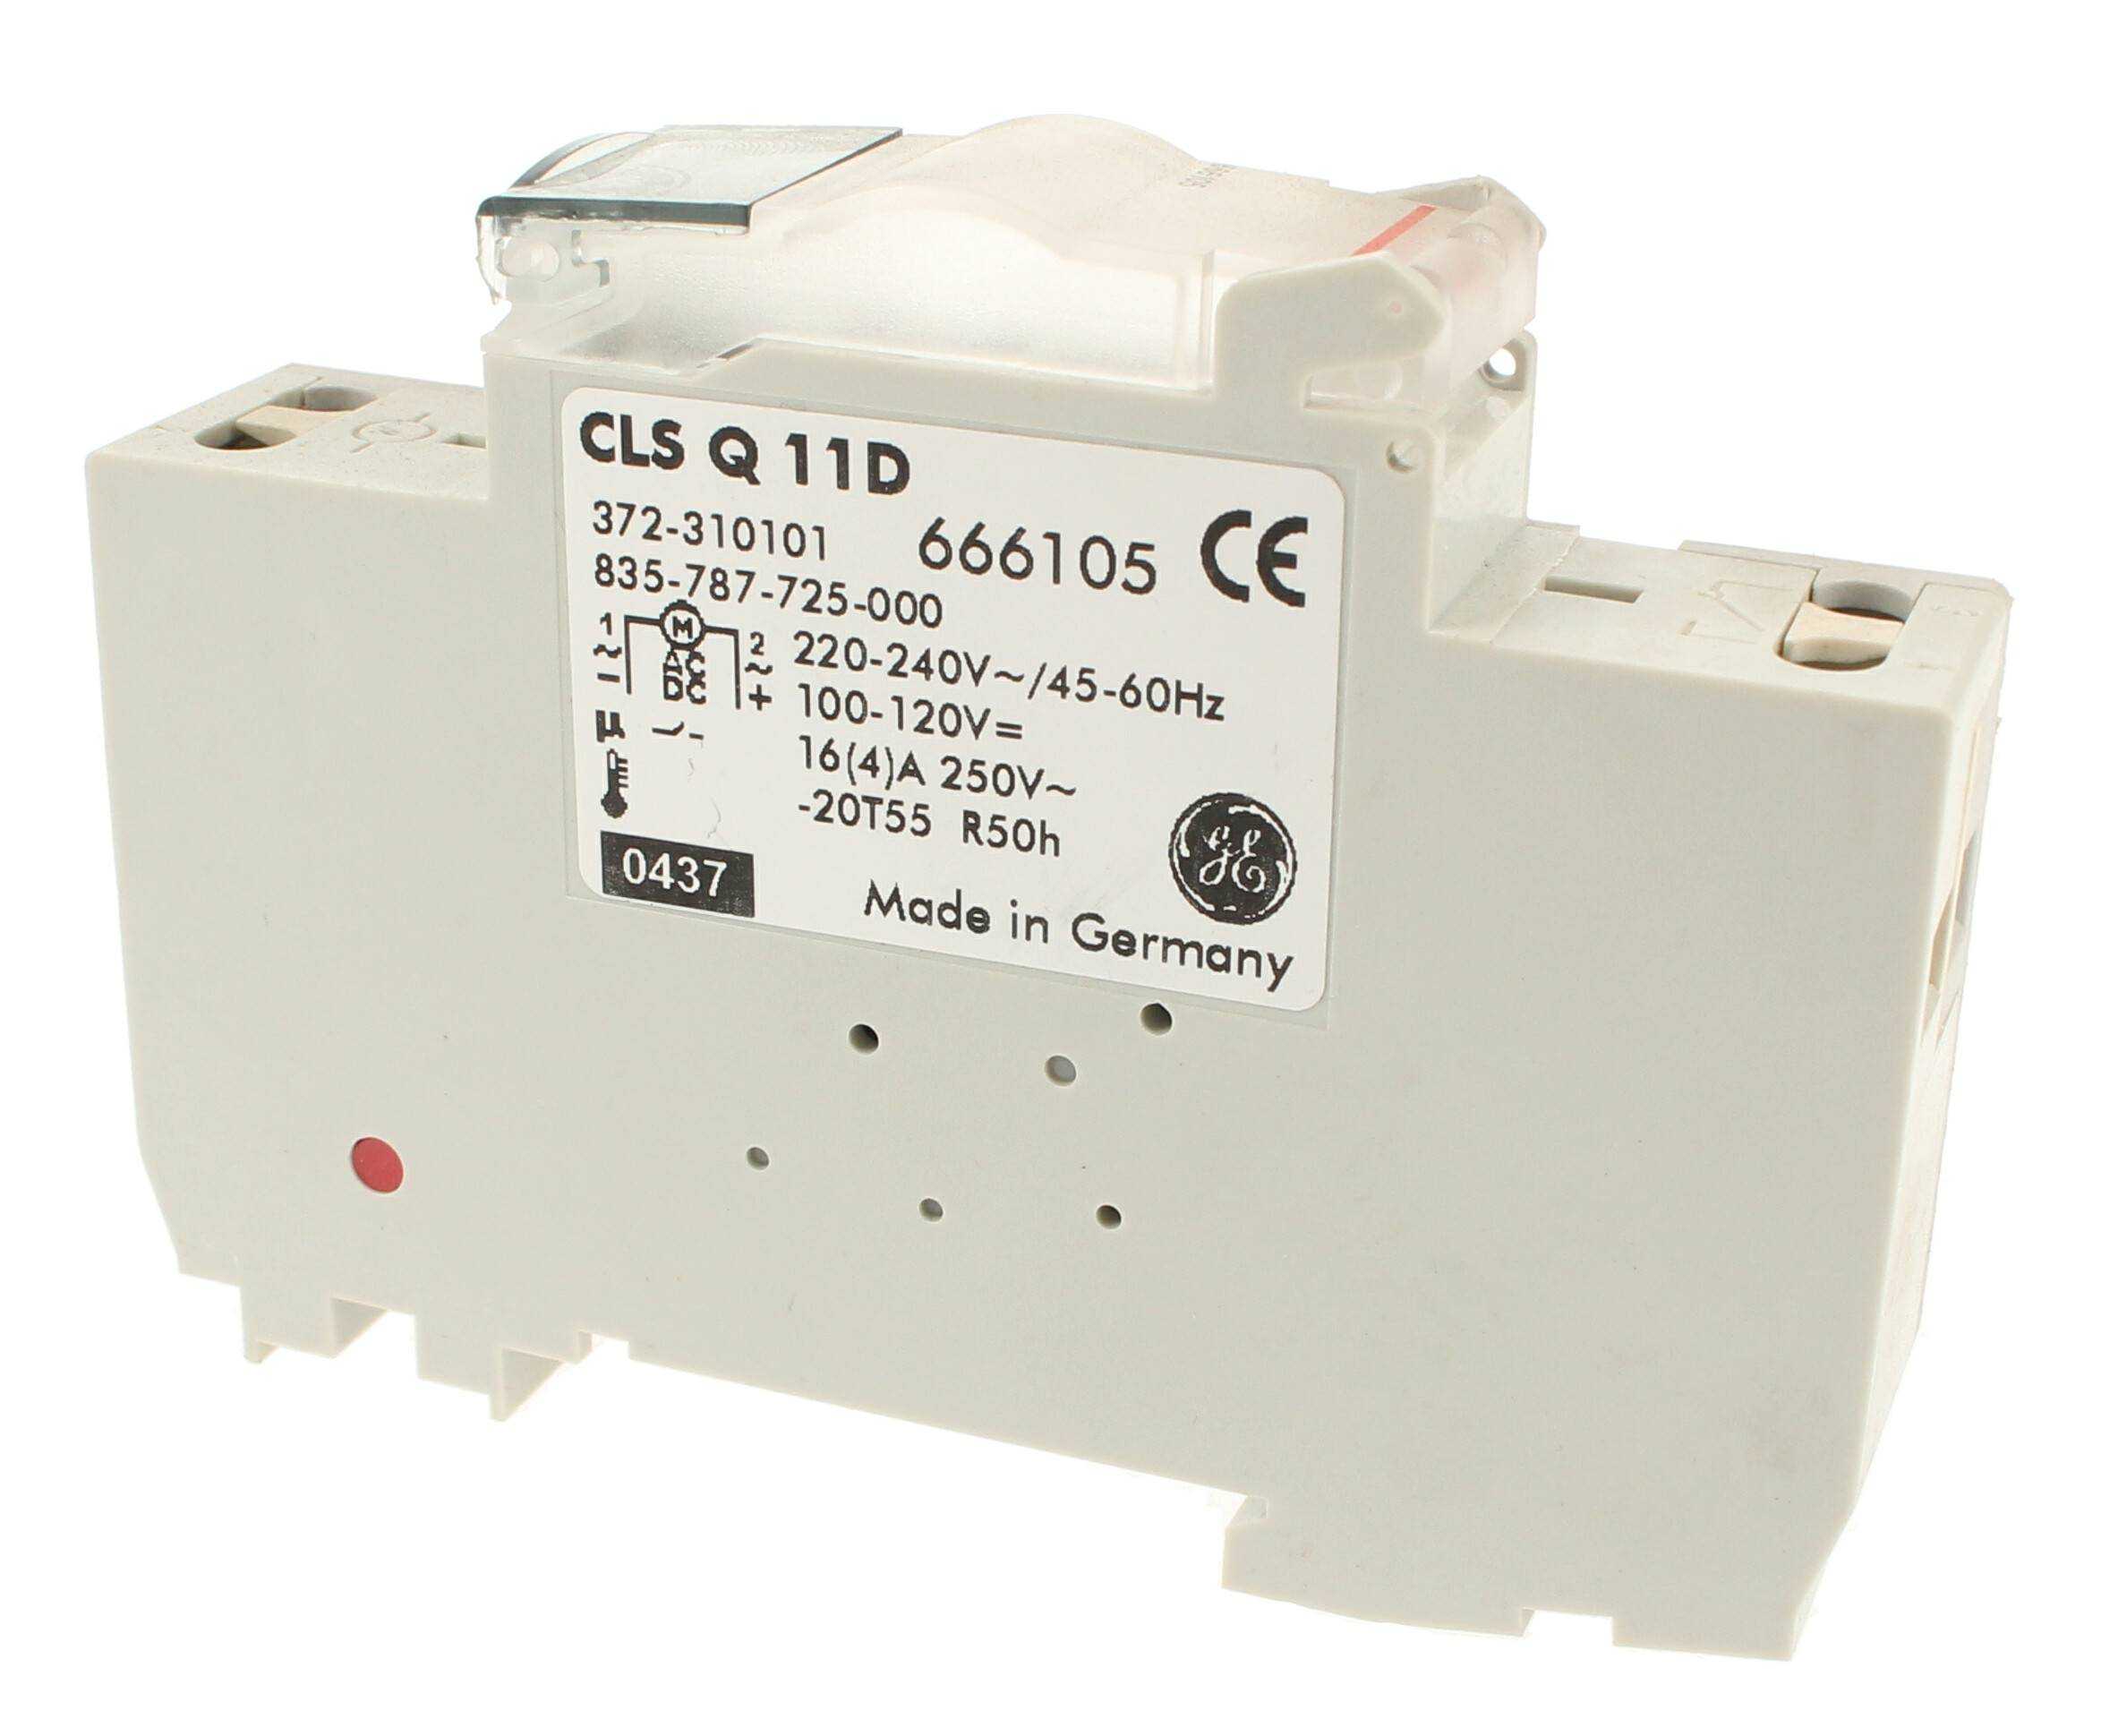 ANALOG TIME SWITCH CLSQ11D 666105 GE